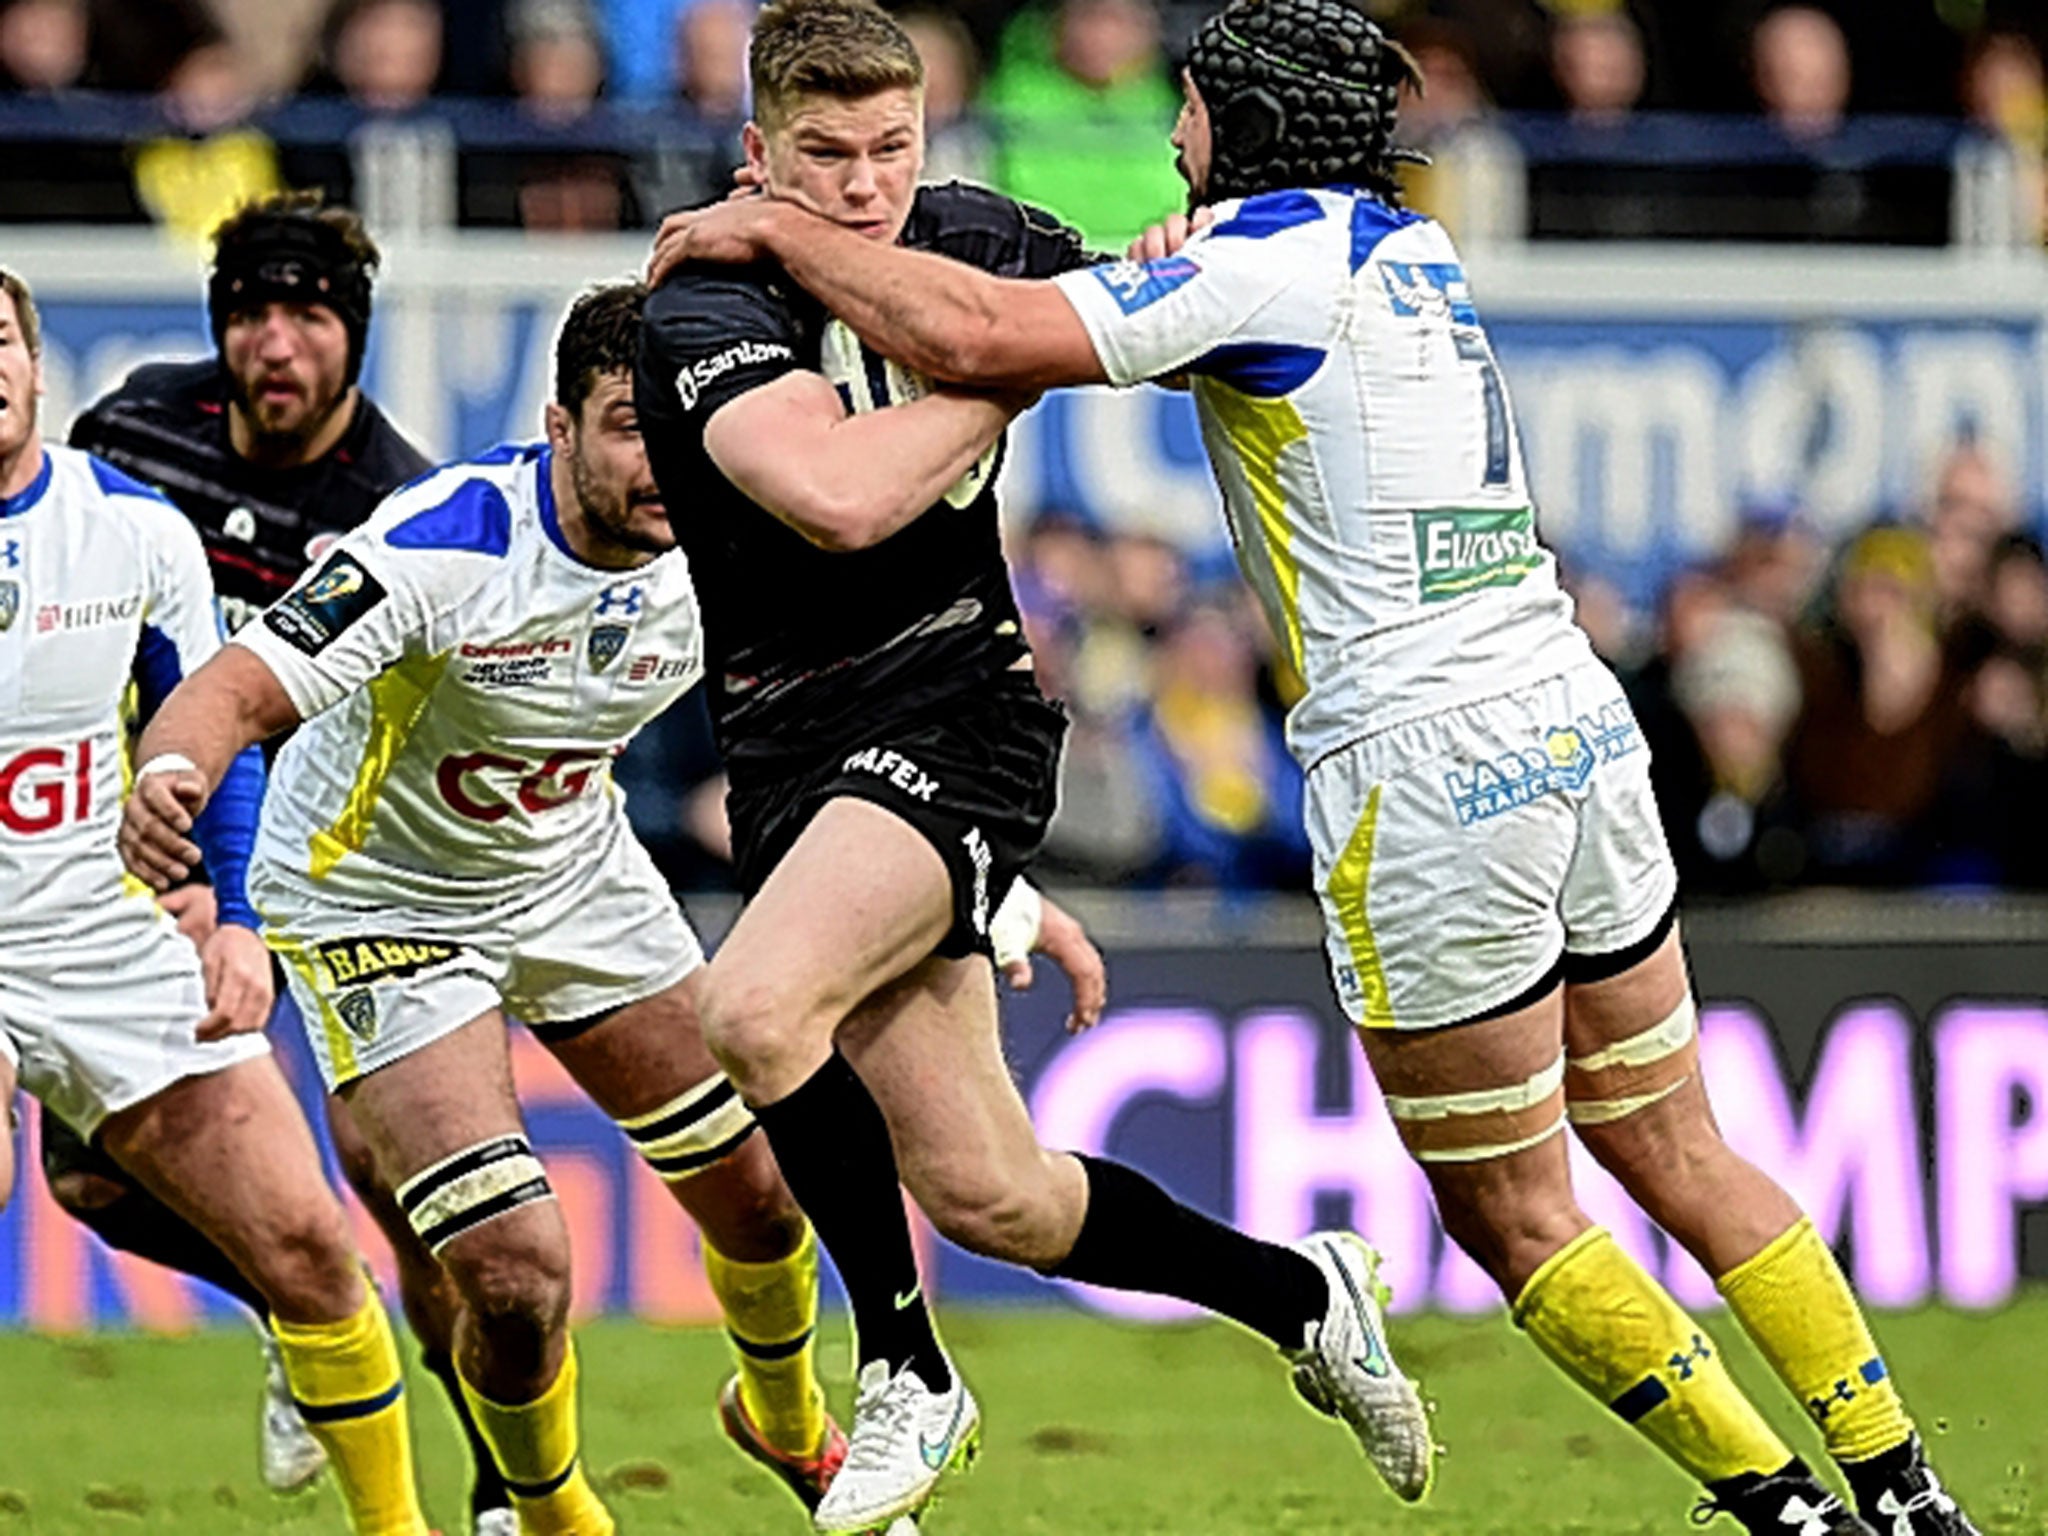 Owen Farrell, of Saracens, who later went off with a leg injury, is tackled by Clermont’s Julien Bardy at Stade Marcel Michelin